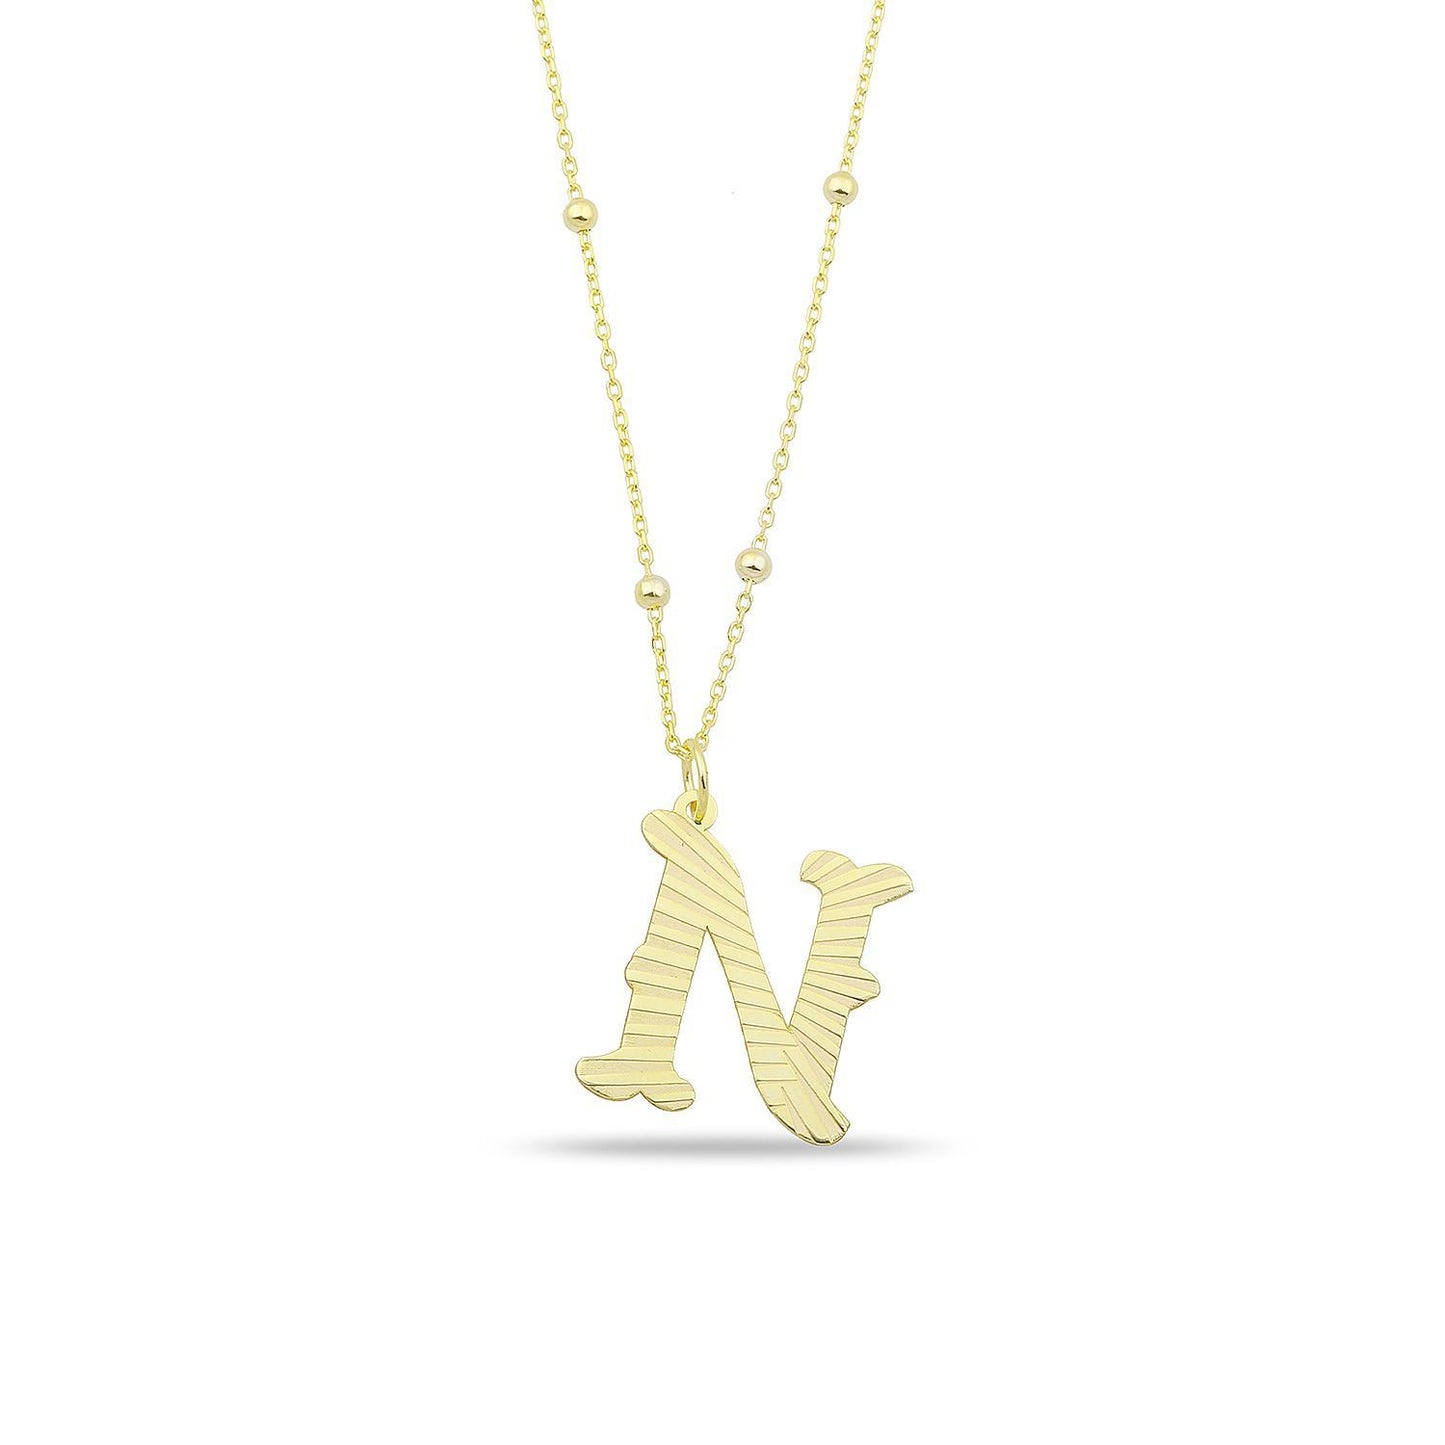 The Sis Kiss Muse Initial Necklace JEWELRY The Sis Kiss